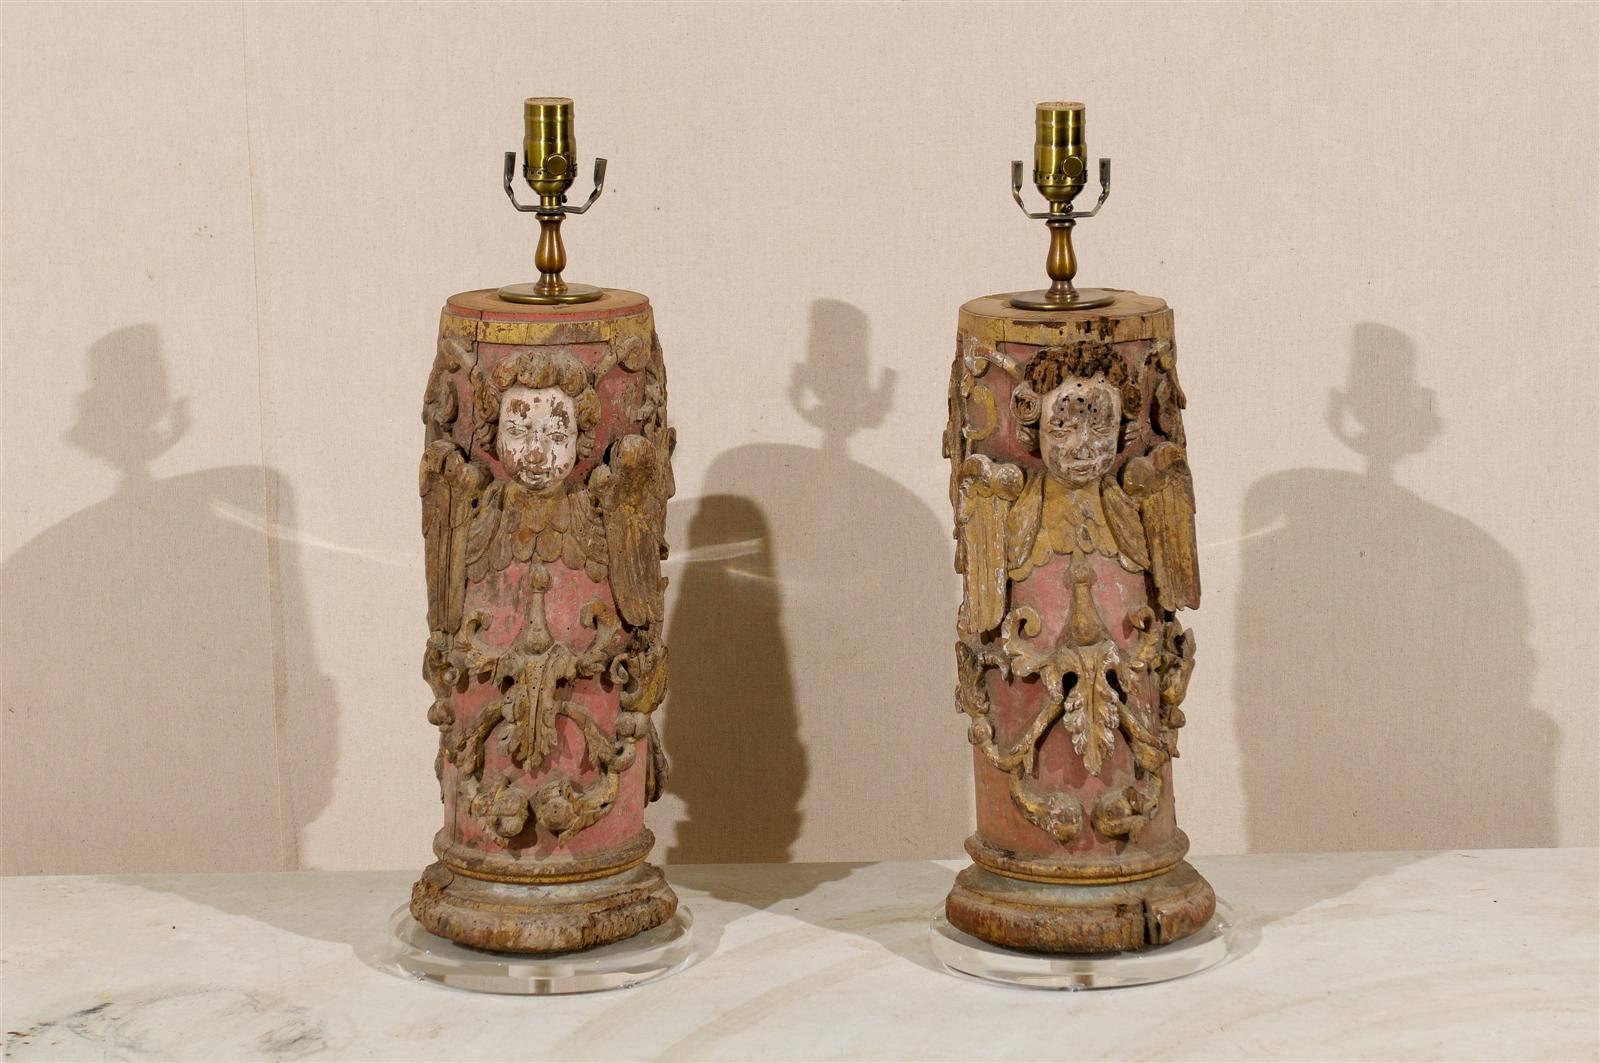 A pair of 18th century Portuguese painted red wood column table lamps with traces of gilding throughout.  These Southern European table lamps feature a wrap-around depiction that includes: carved angels, ornate scroll motifs and nicely carved